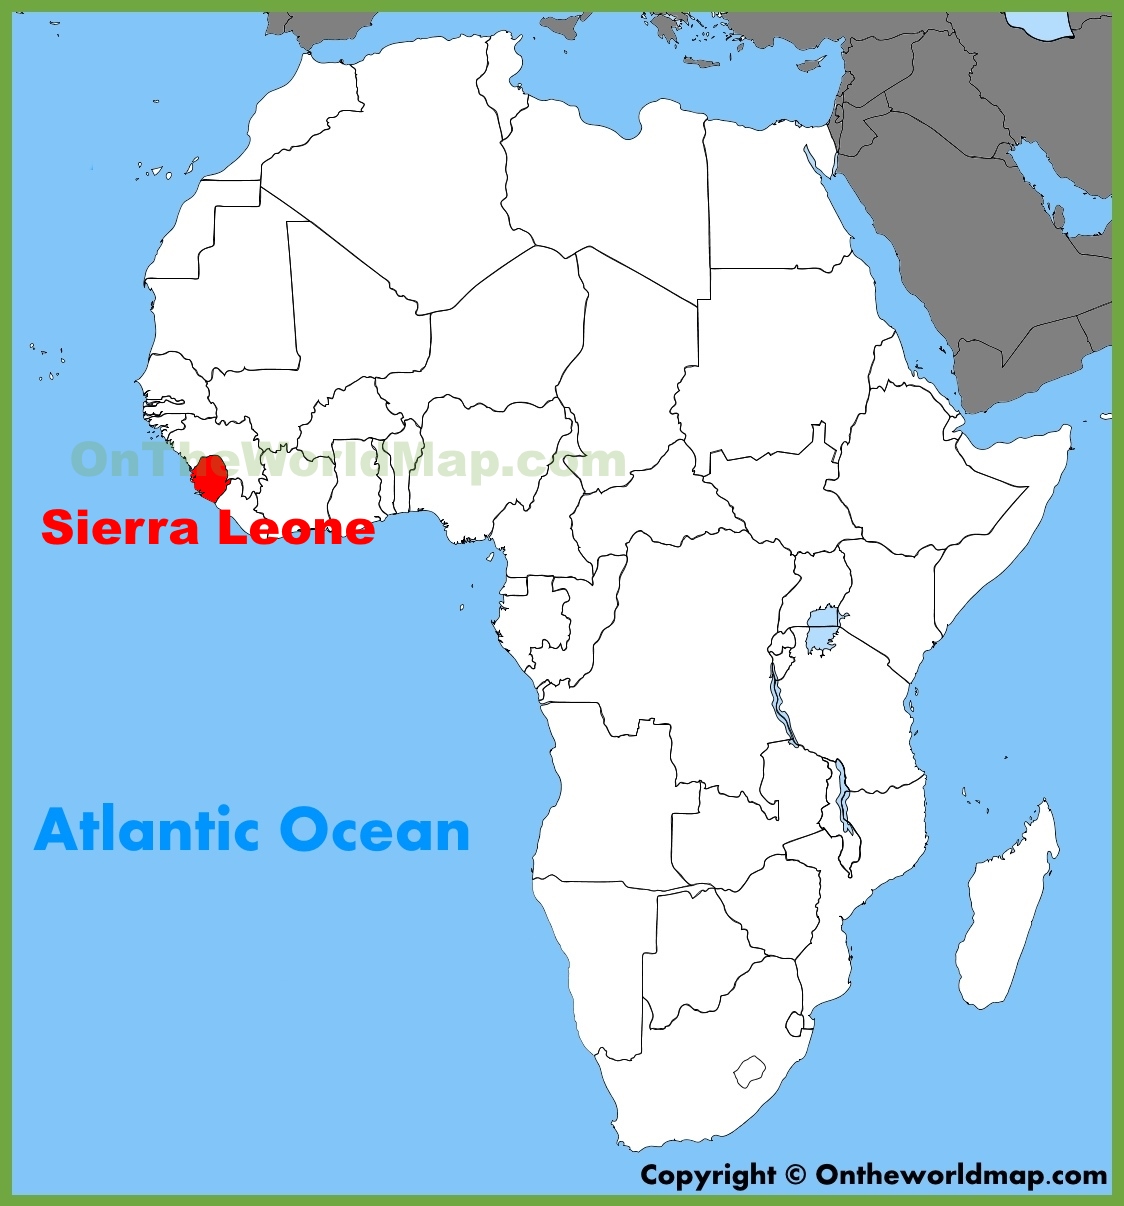 Sierra Leone Location On The Africa Map